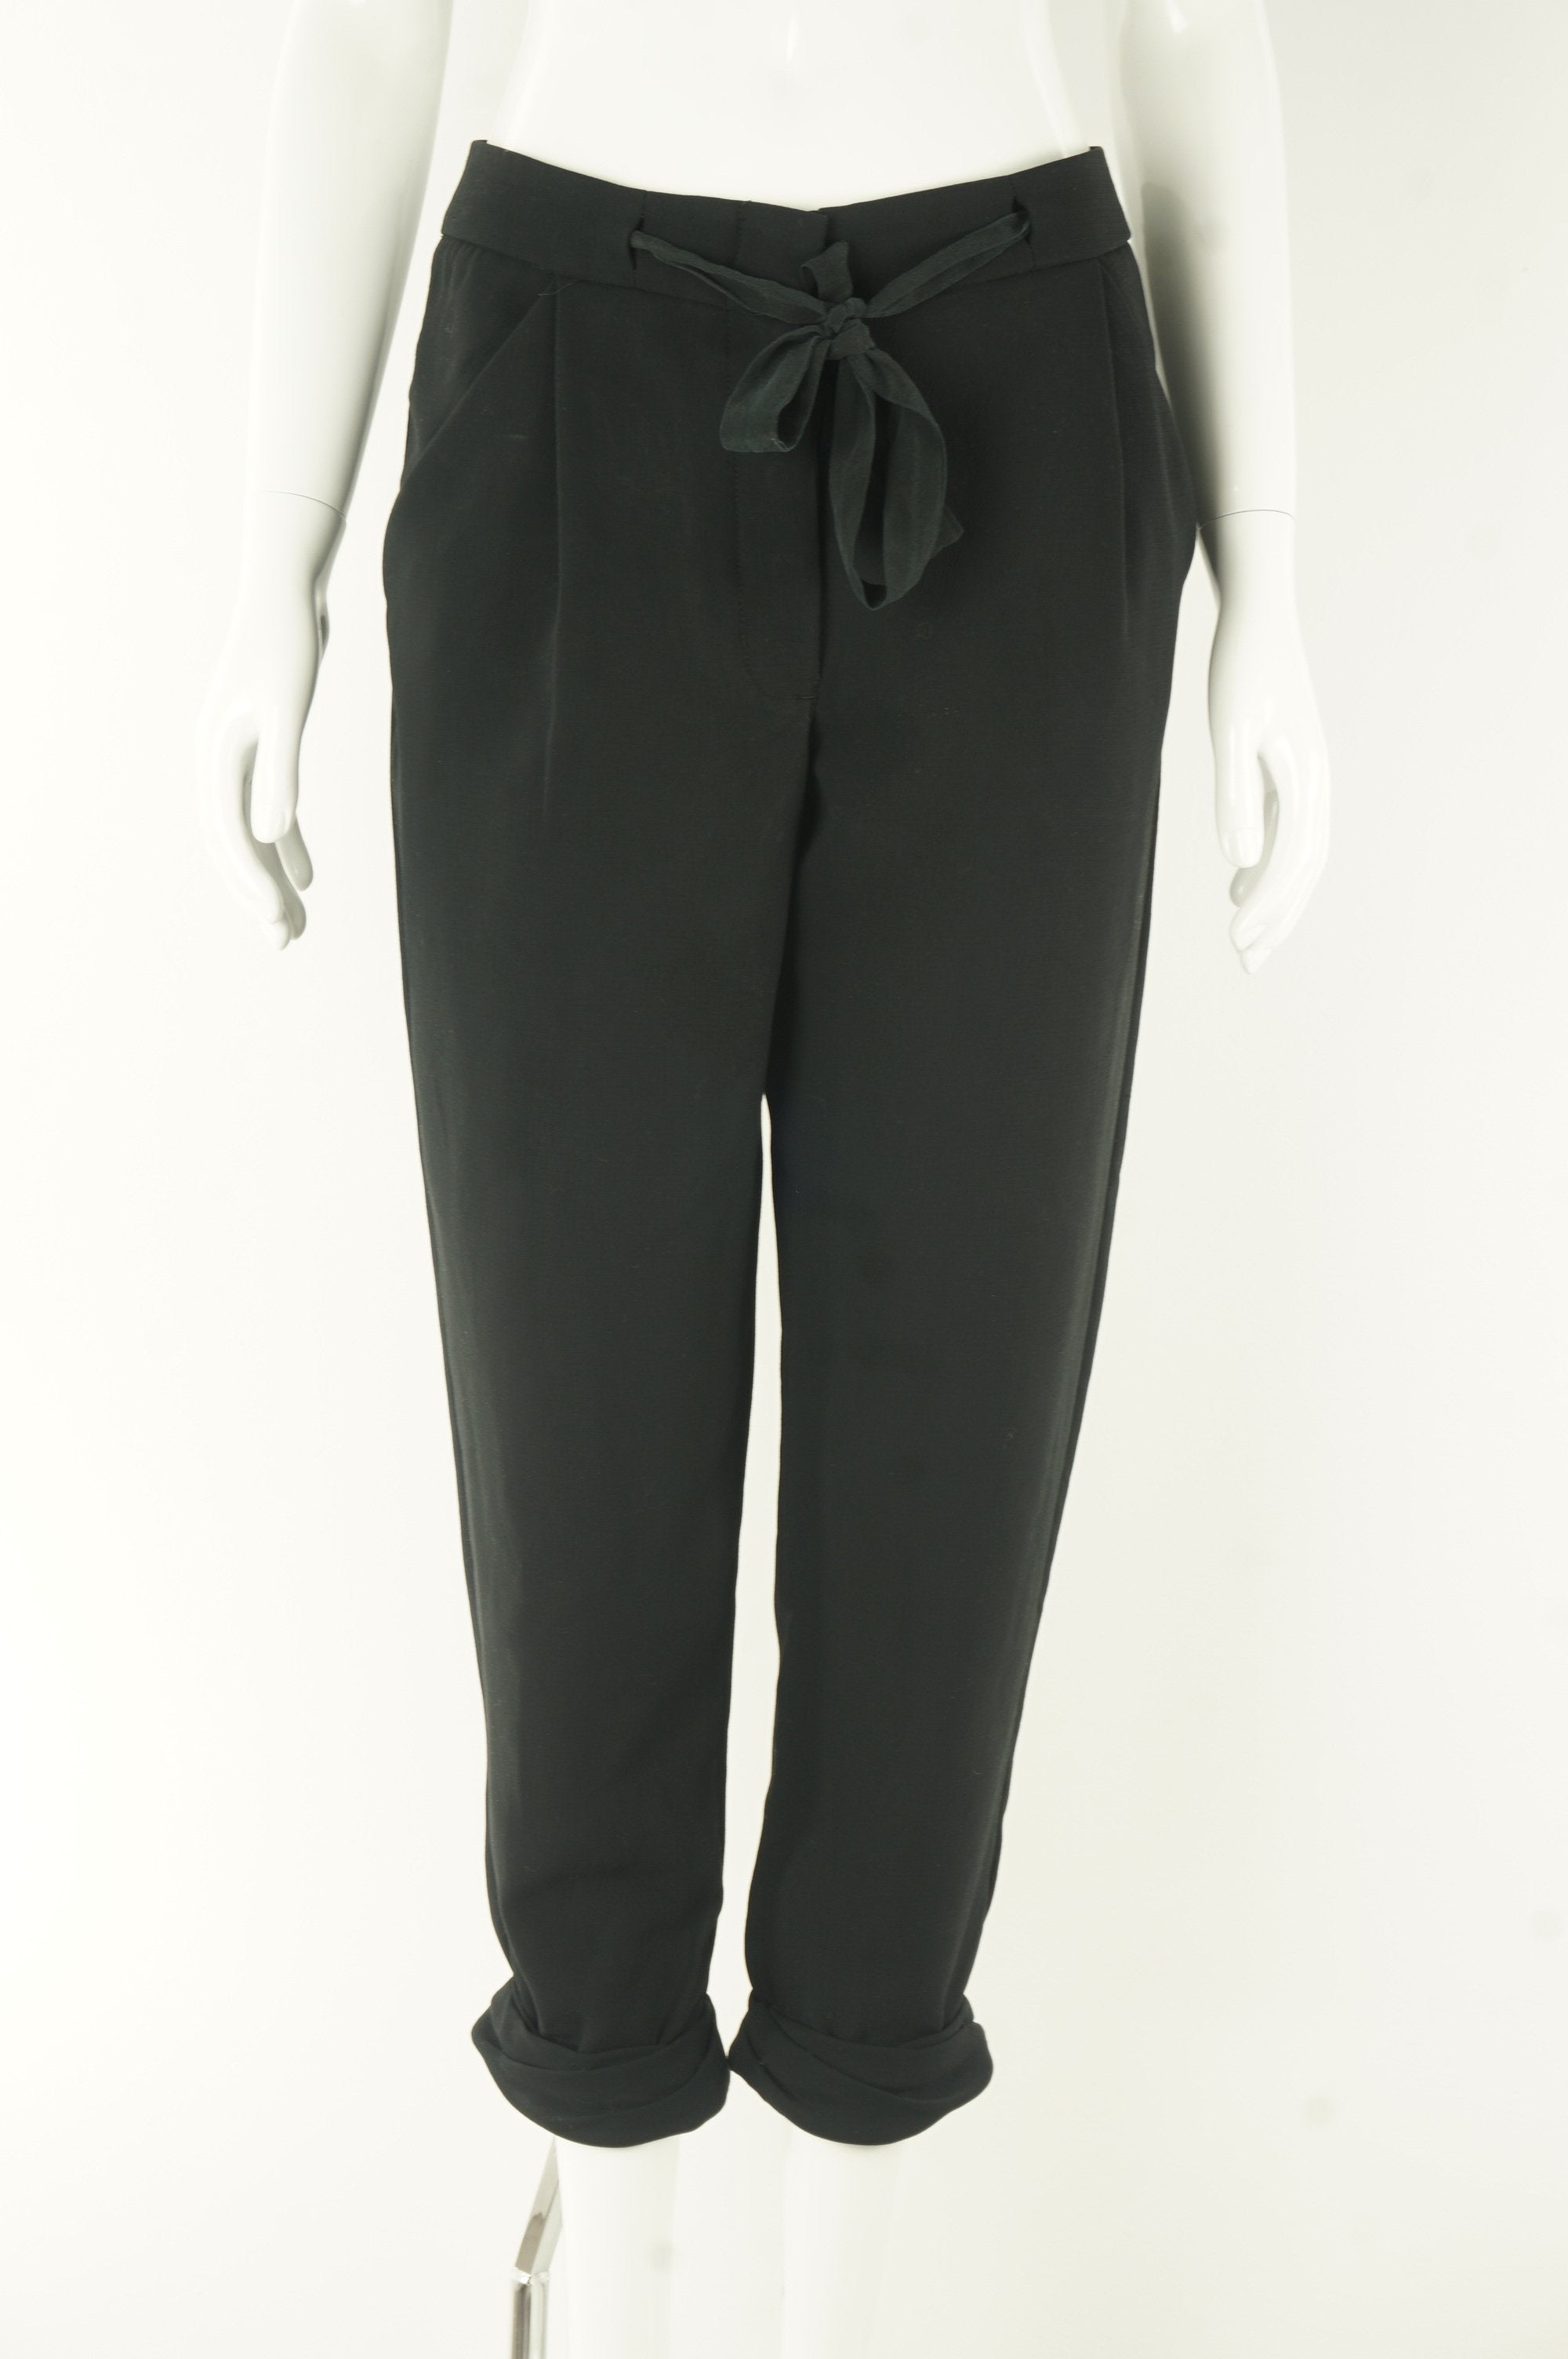 Wilfred Cropped Linen Paper bag Pants, Another stylish yet comfortable pants, Black, 100% Polyester, women's Pants, women's Black Pants, Wilfred women's Pants, Comfy pants, Work pantaloon pants,  fashion, designer, women's cropped linen ankle pants, Women's business casual pants, wide leg trousers with a self-tie belt